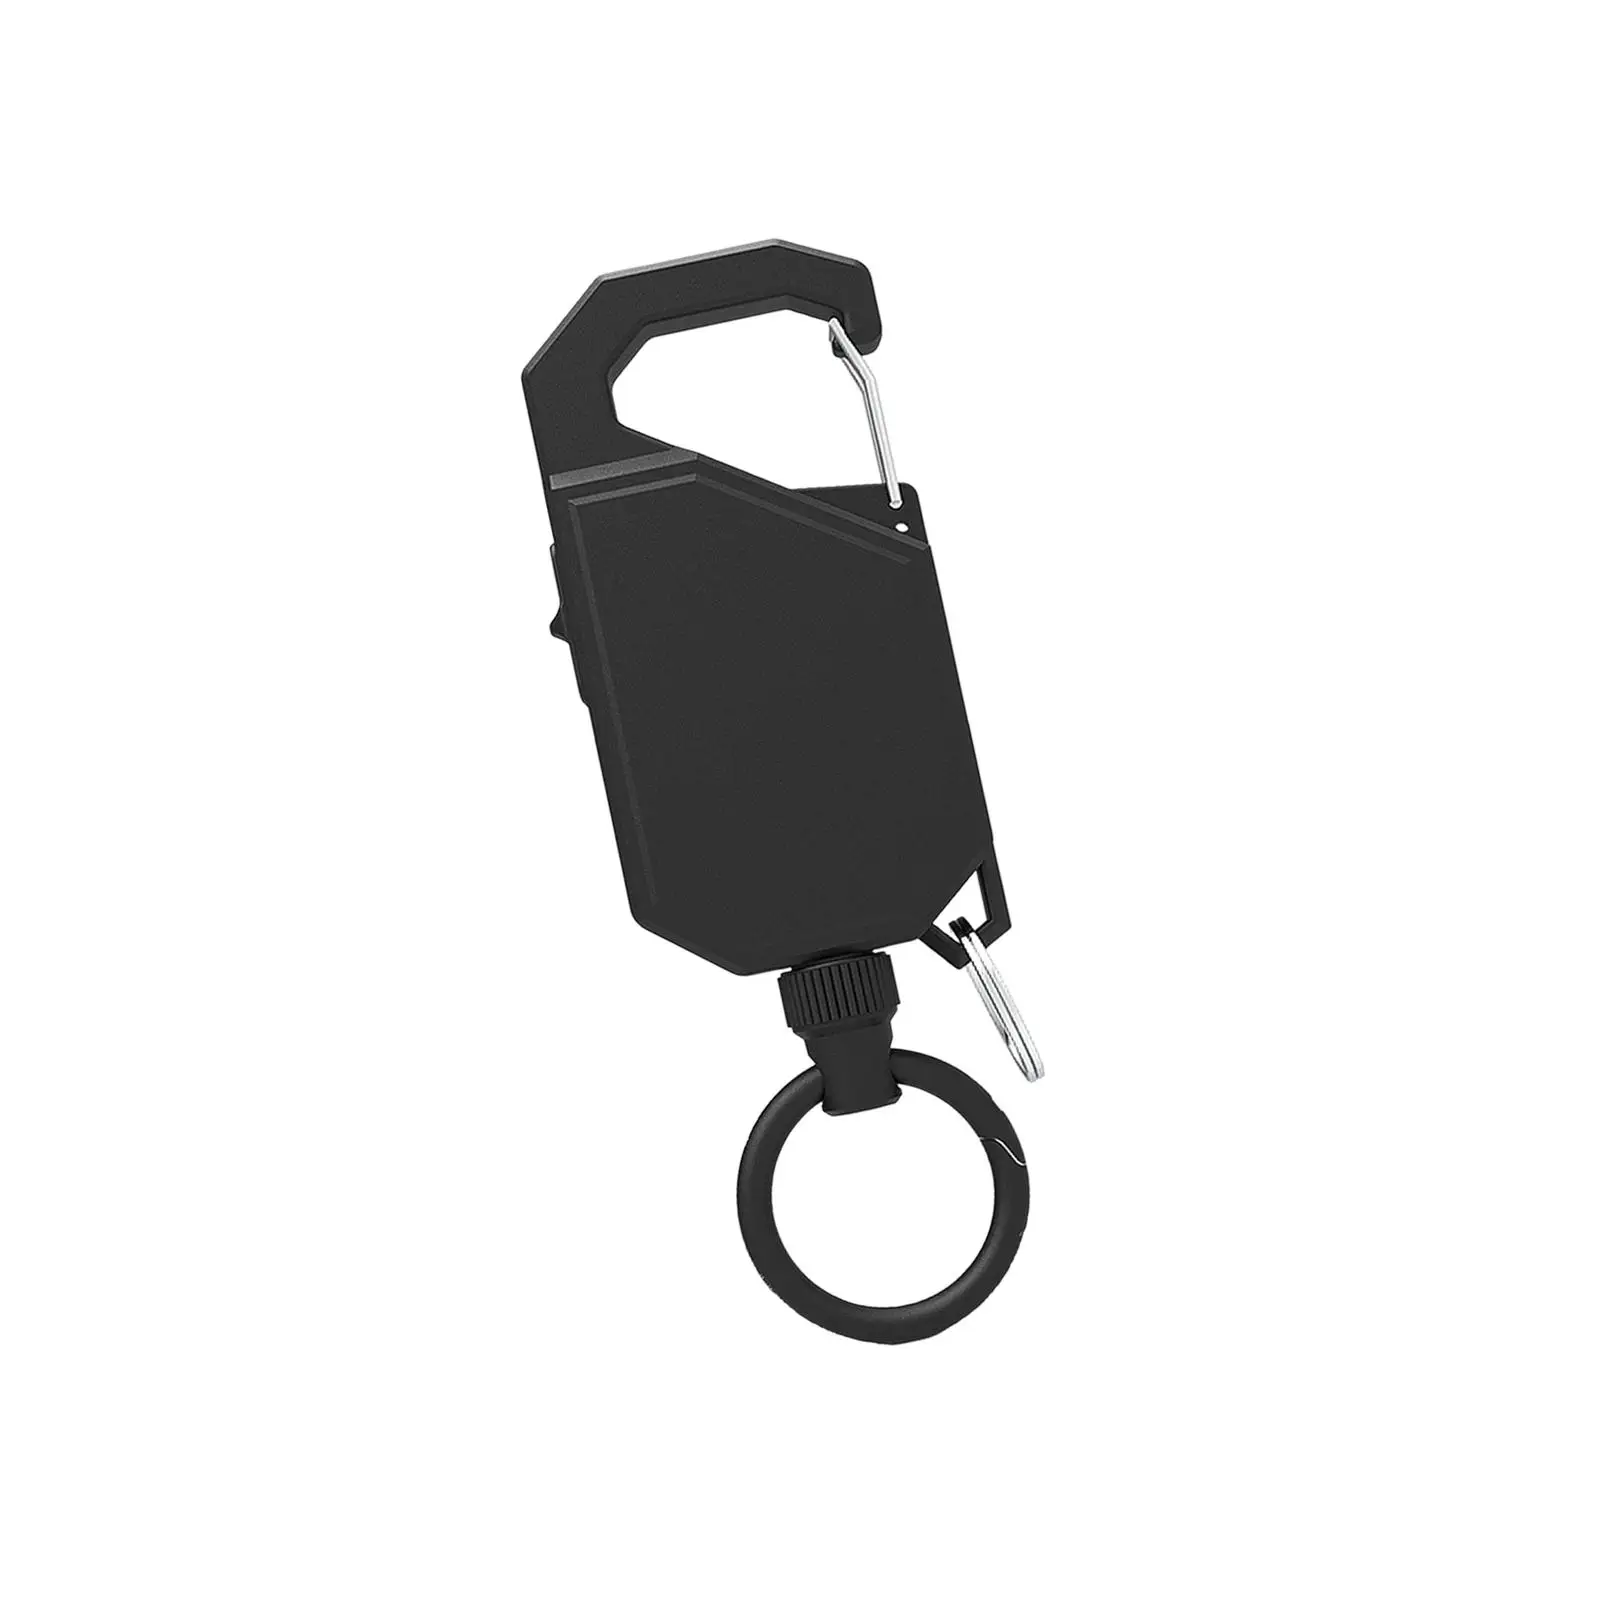 Fly Fishing Zinger Fishing Gear Retainer Sturdy Retractable Badge Holder for Hiking